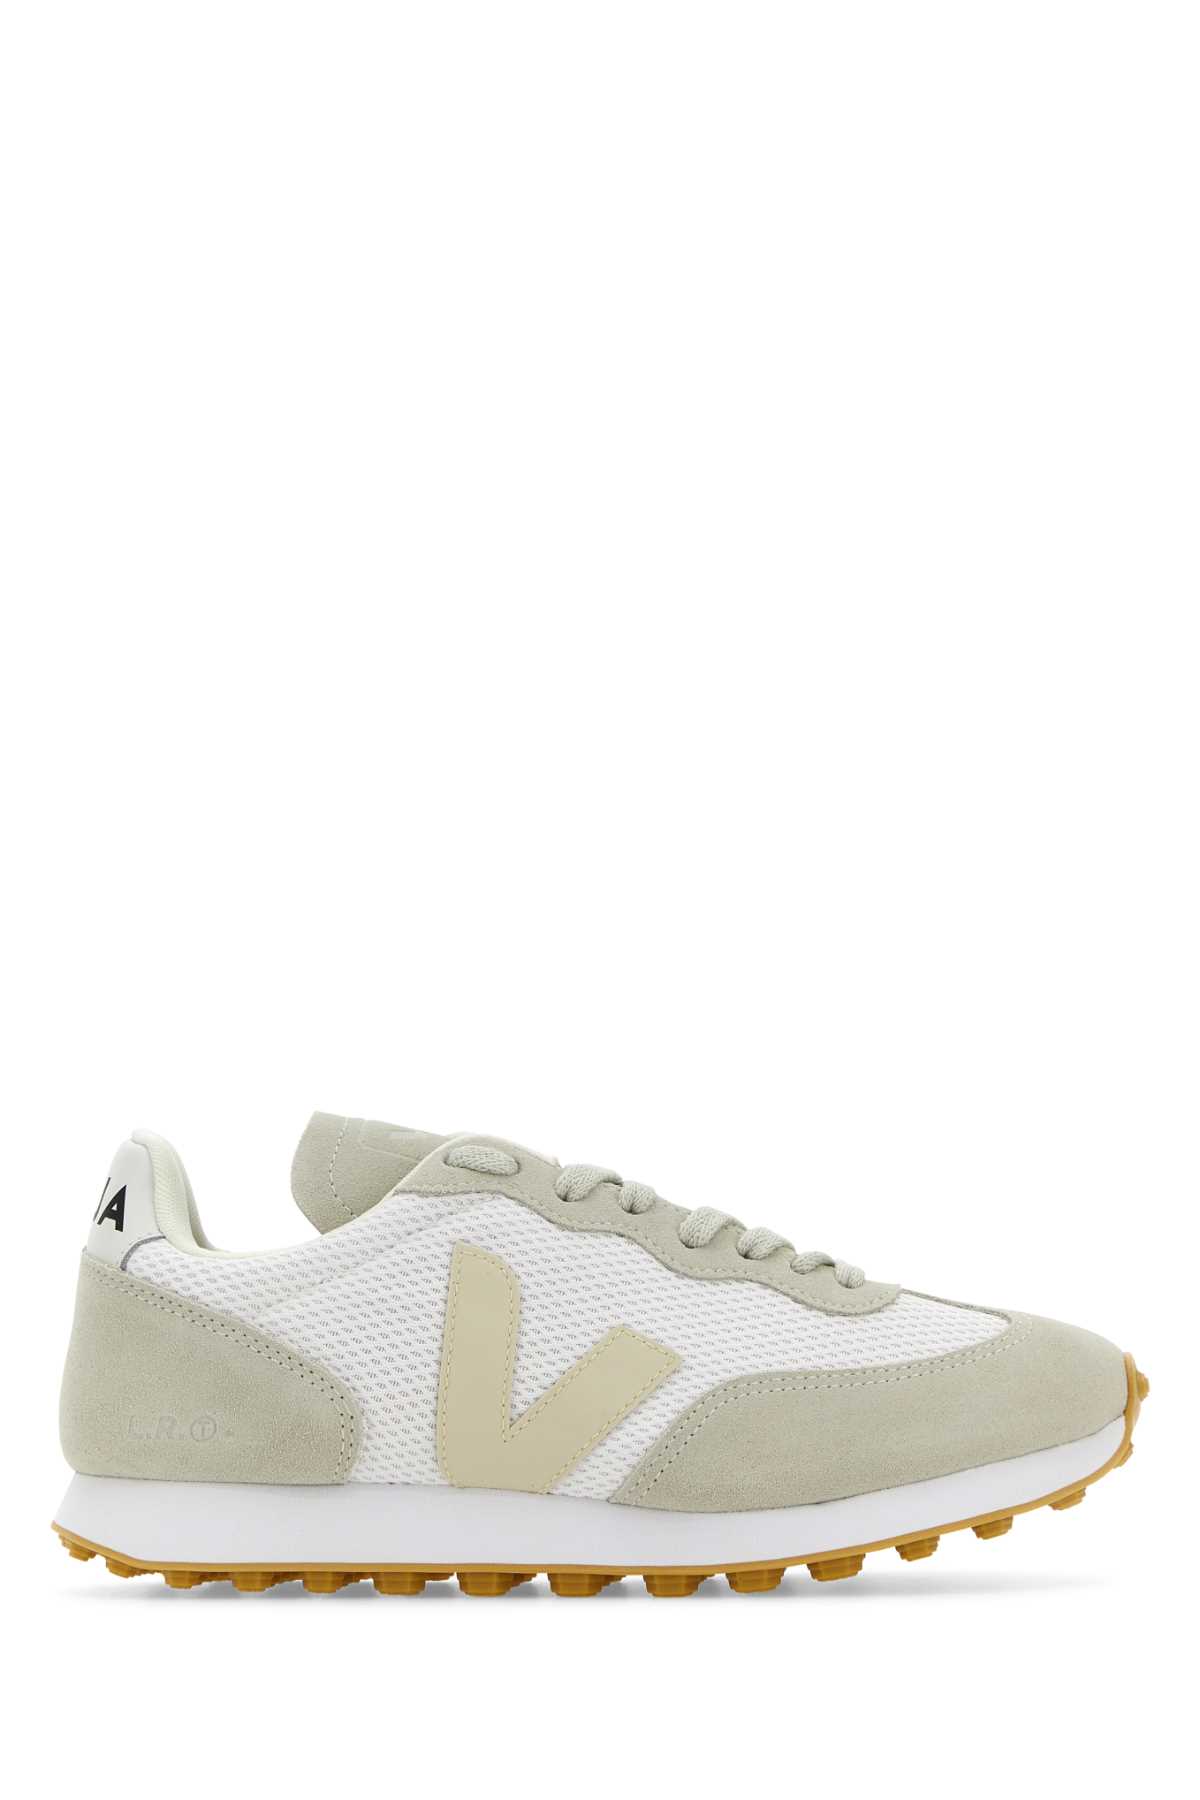 Veja Two-tones Polyester And Suede Rio Branco Sneakers